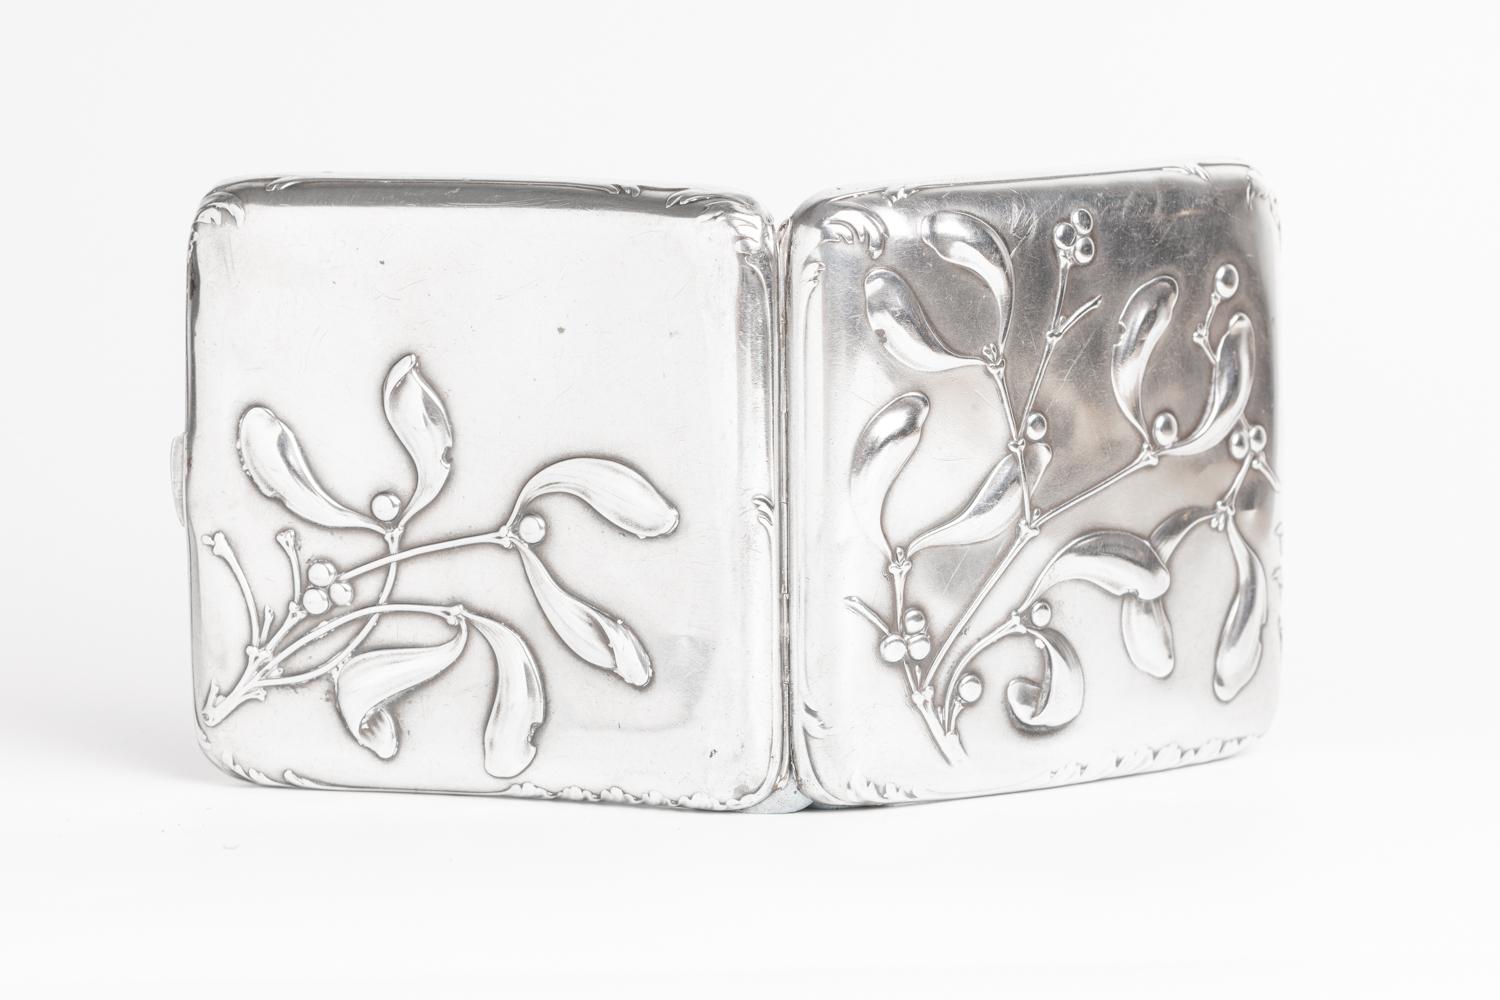  French Art Nouveau Silver Cigarette Case By Charles Murat In Good Condition For Sale In Portland, England